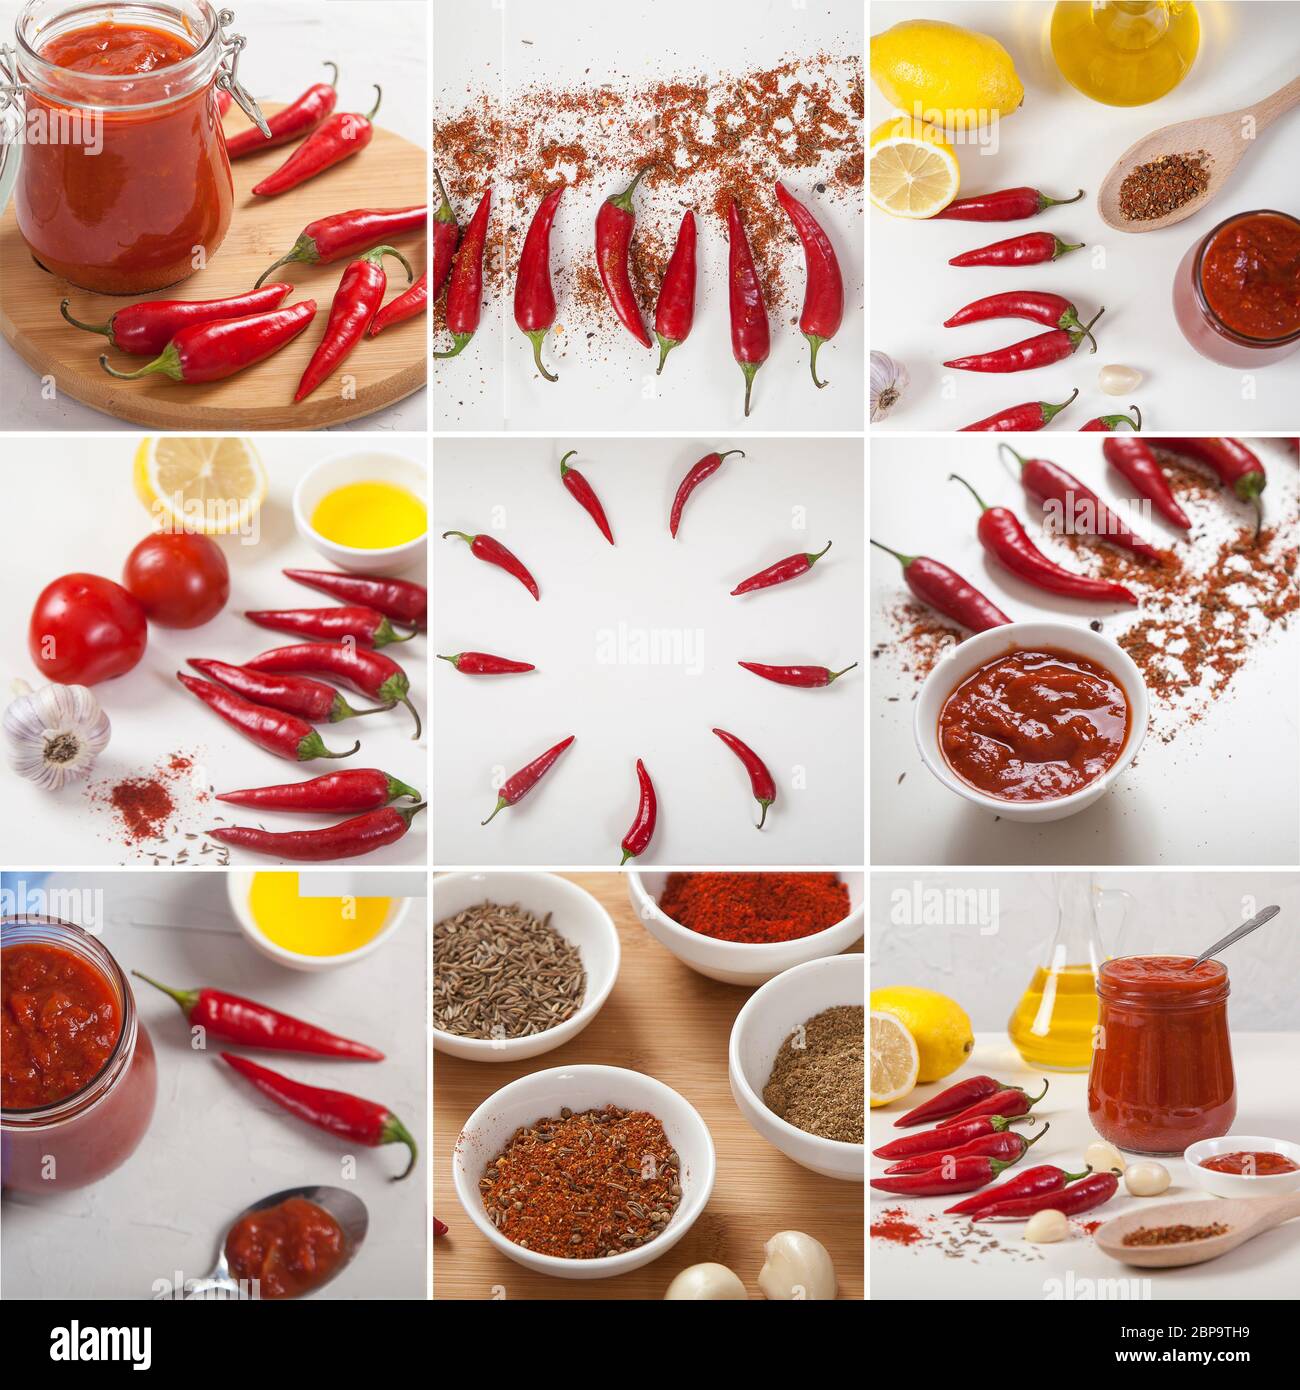 Collage of harissa, spices, spices, peppers, tomatoes on a light background. Seasoning. National cuisine Stock Photo